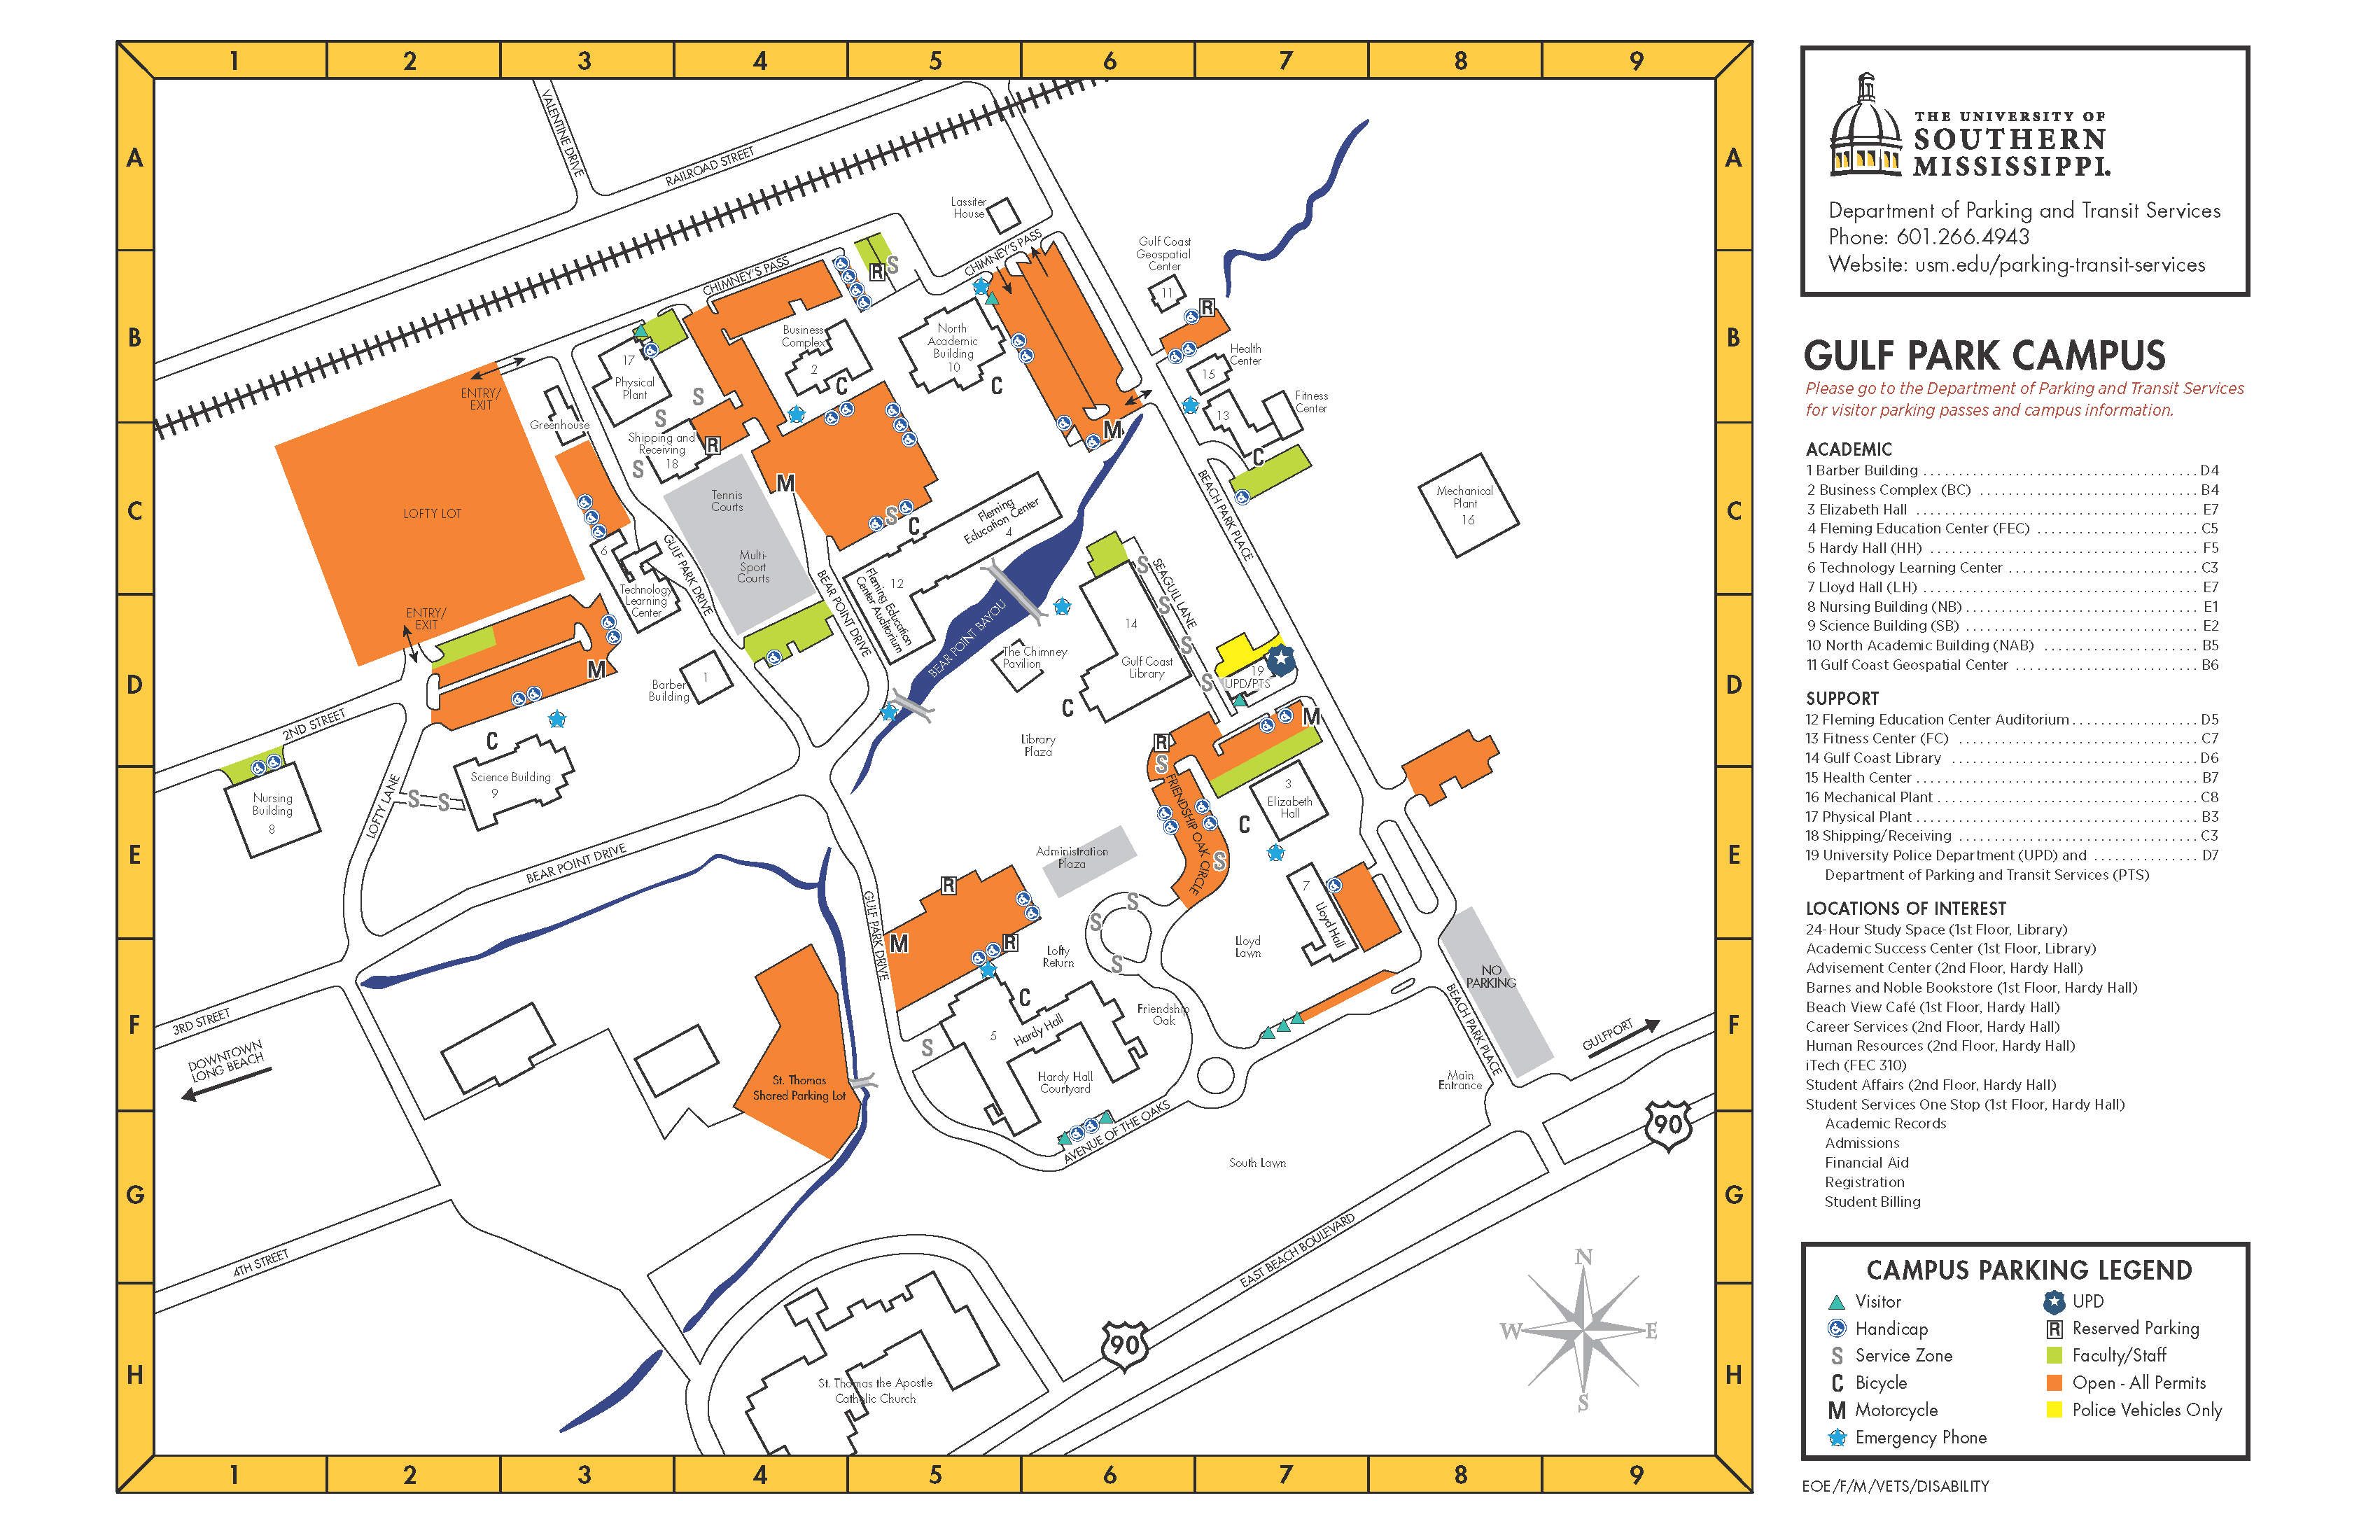 Southern Miss Campus Map Campus Maps | Parking and Transit Services | The University of 